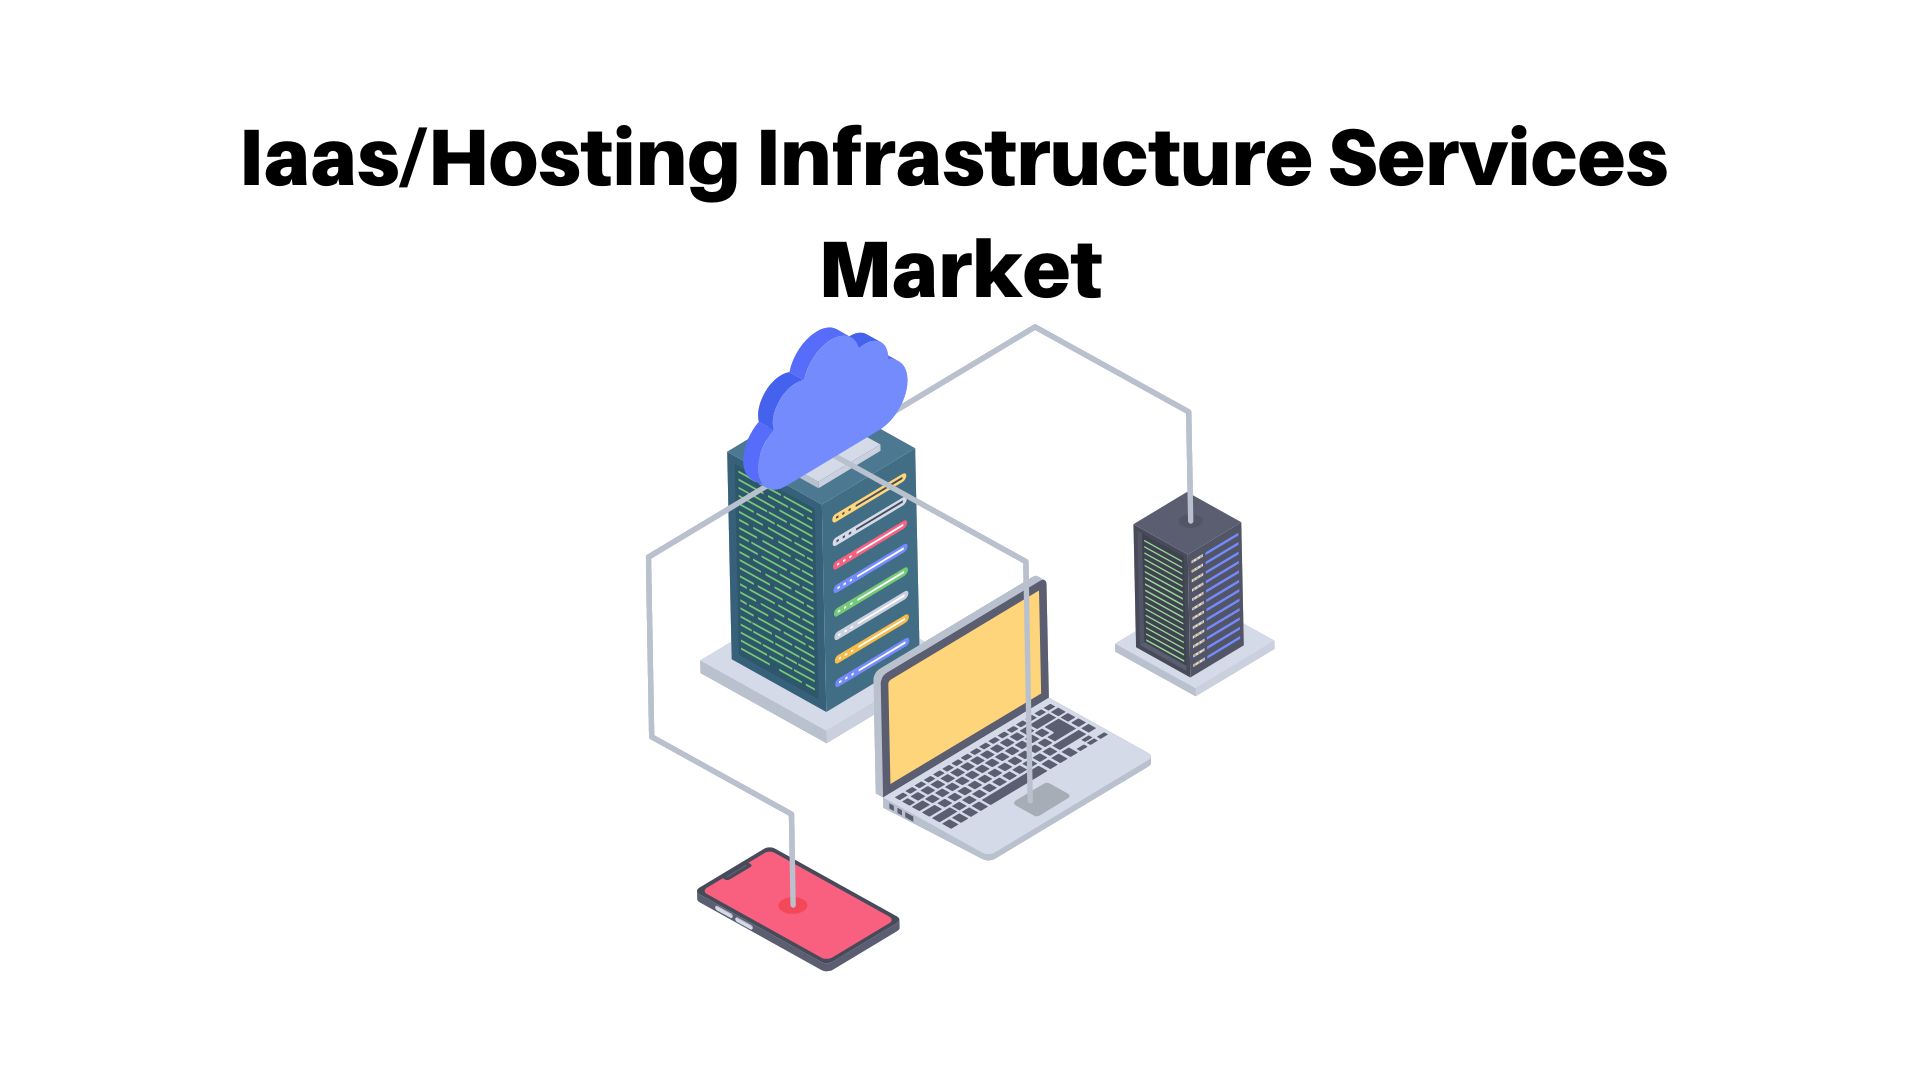 Iaas/Hosting Infrastructure Services Market Size will Observe Sub